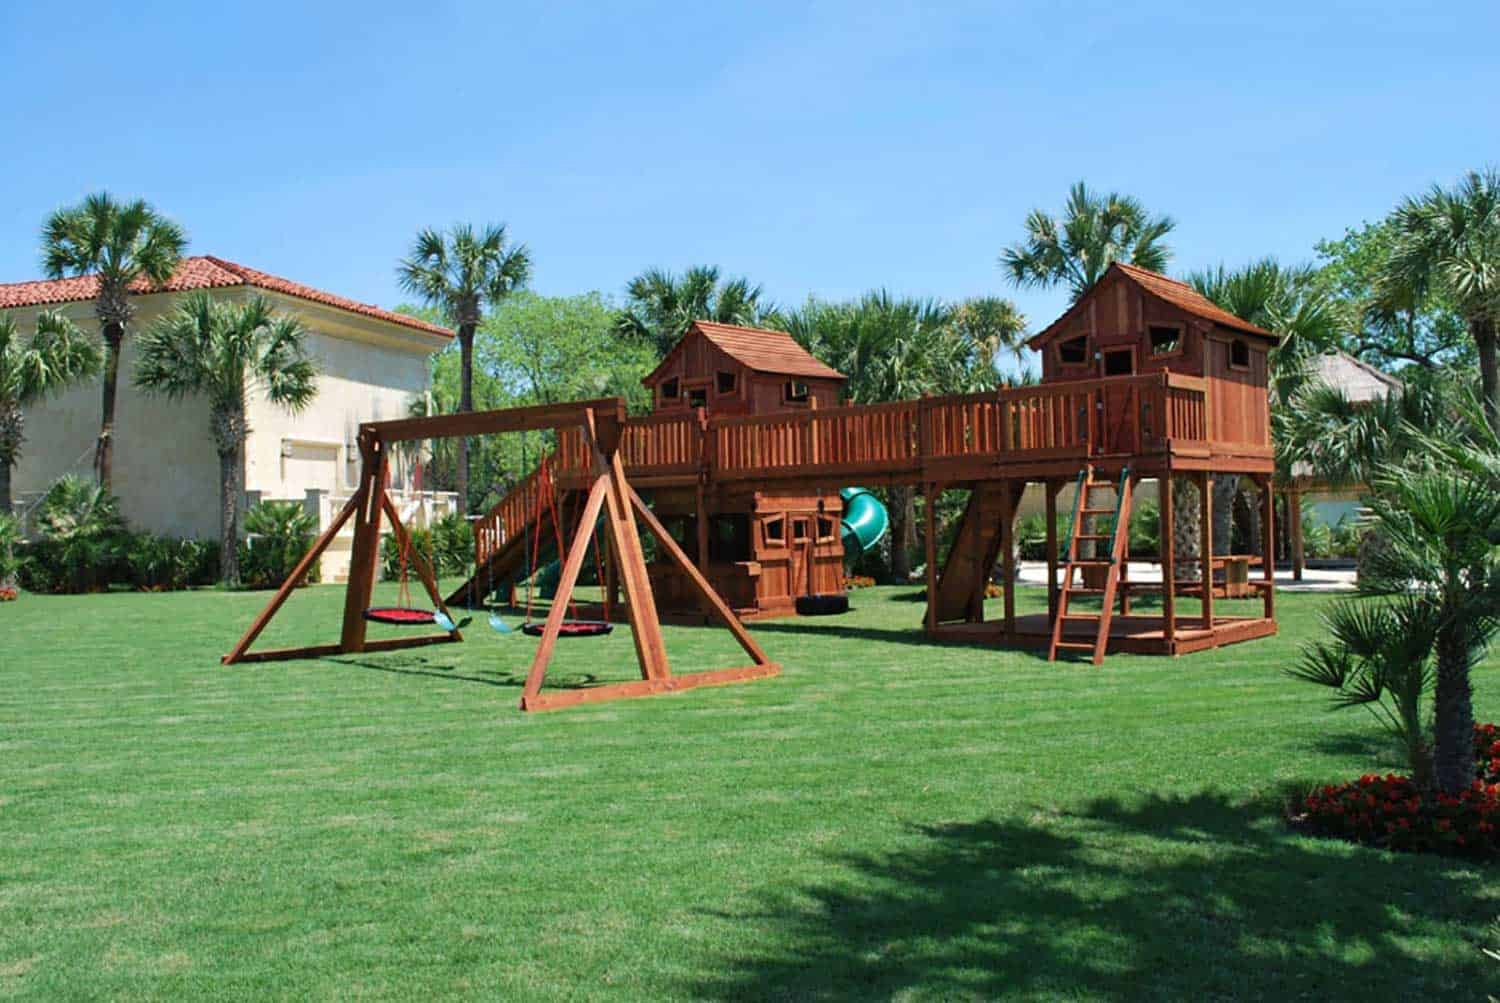 Swing Set Argyle, Texas, bridged ticonderoga redwood playsets with lemonade stand, picnic table, cabins, ramps, boardwalk, and slides